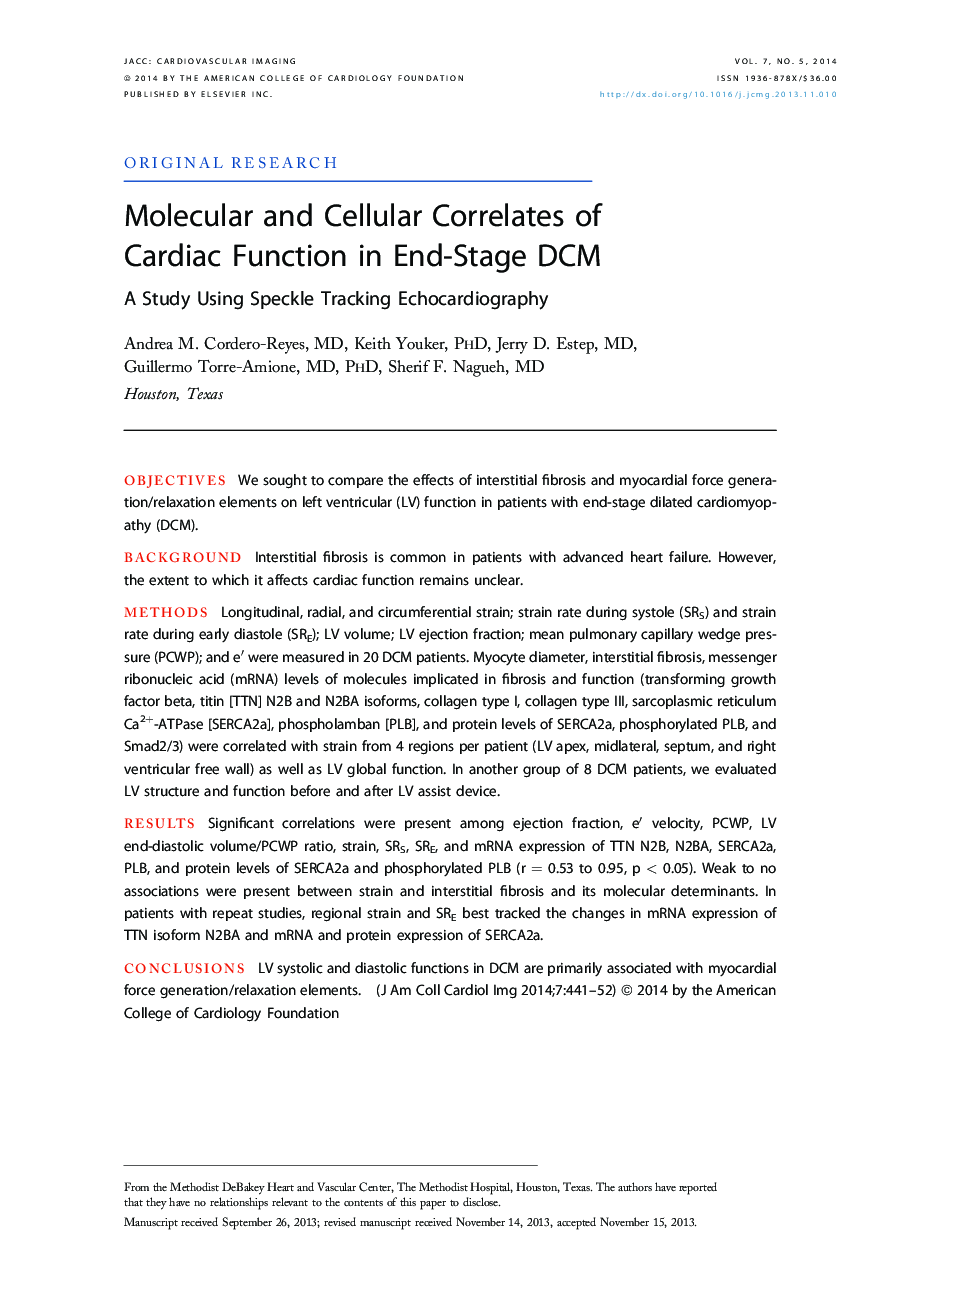 Molecular and Cellular Correlates of Cardiac Function in End-Stage DCM : A Study Using Speckle Tracking Echocardiography